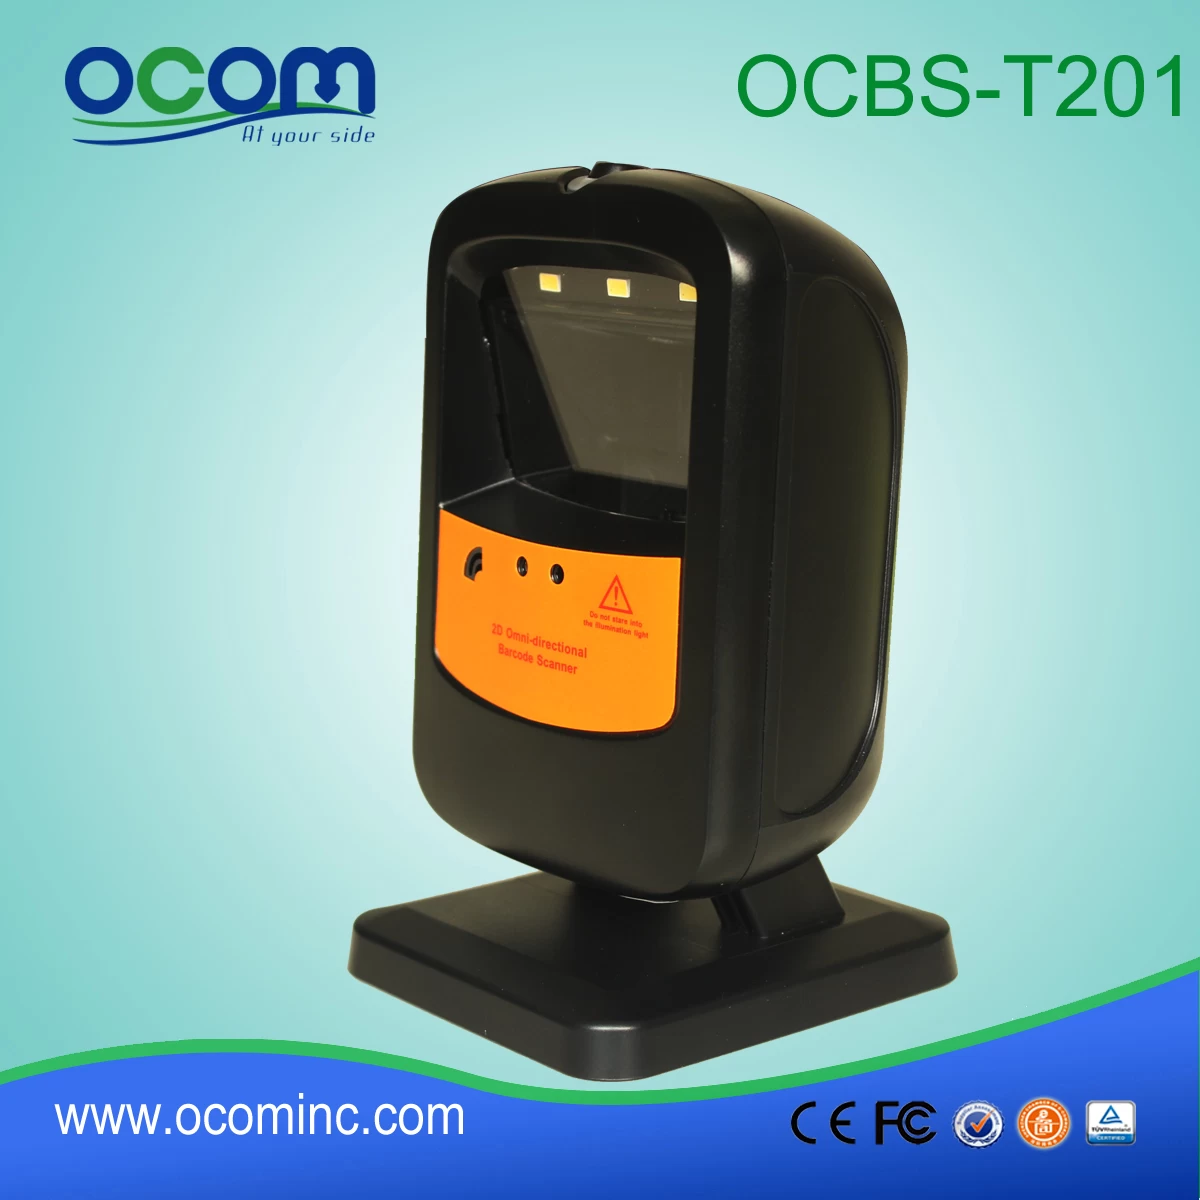 OCBS-T201:omnidirectional barcode scanner rs232, barcode scanner inventory